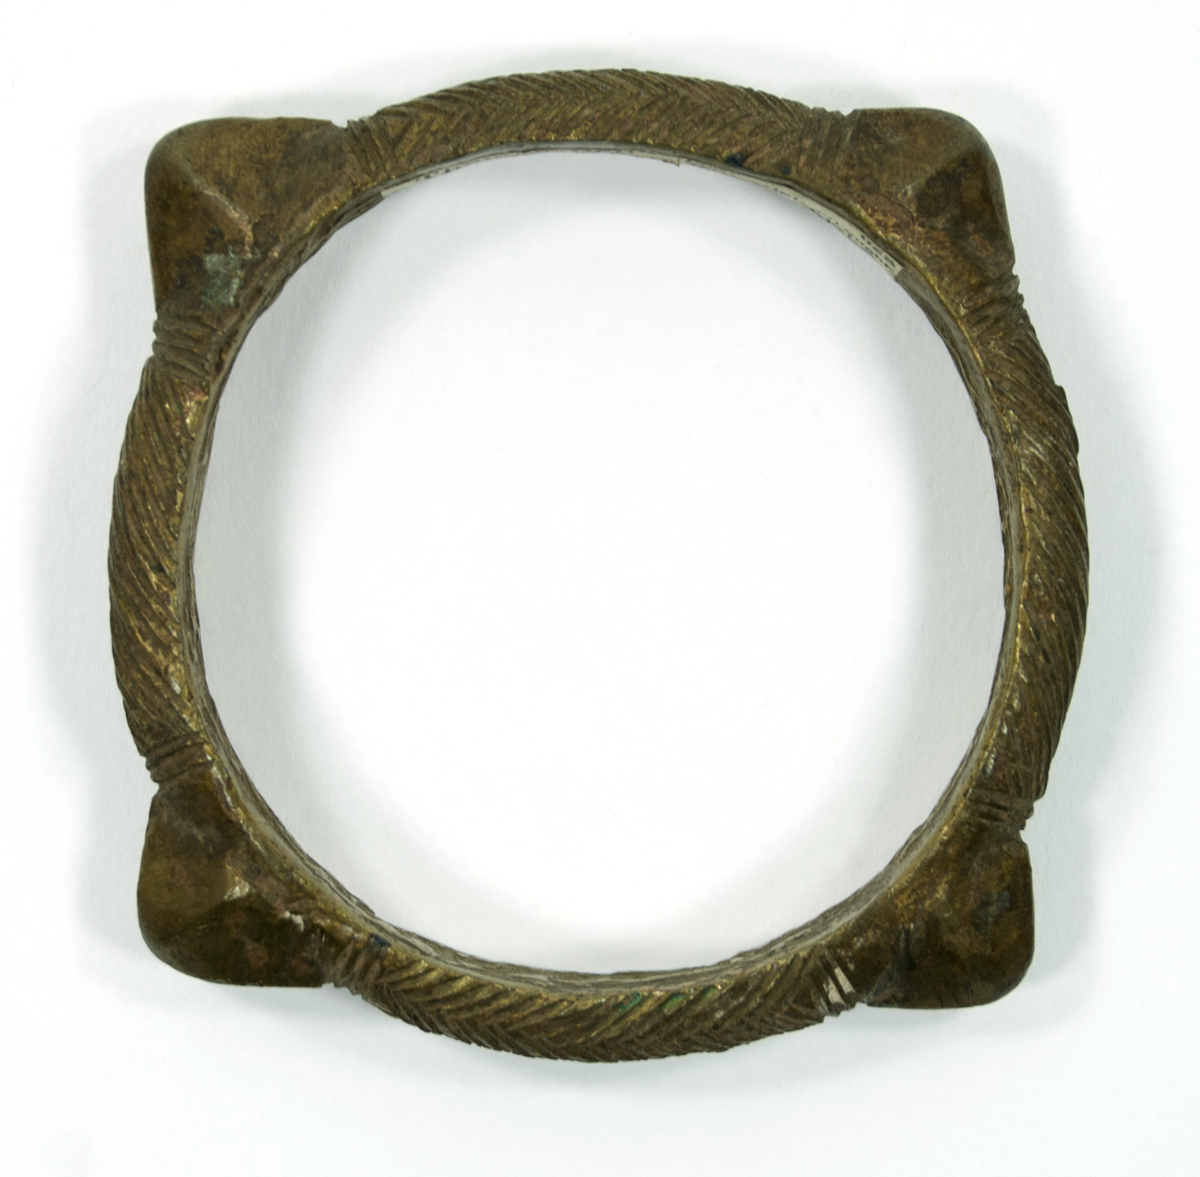 Bracelet wrought brass with four pointed knobs between which are incised patterns, two zig-zag, two oblique shapes.